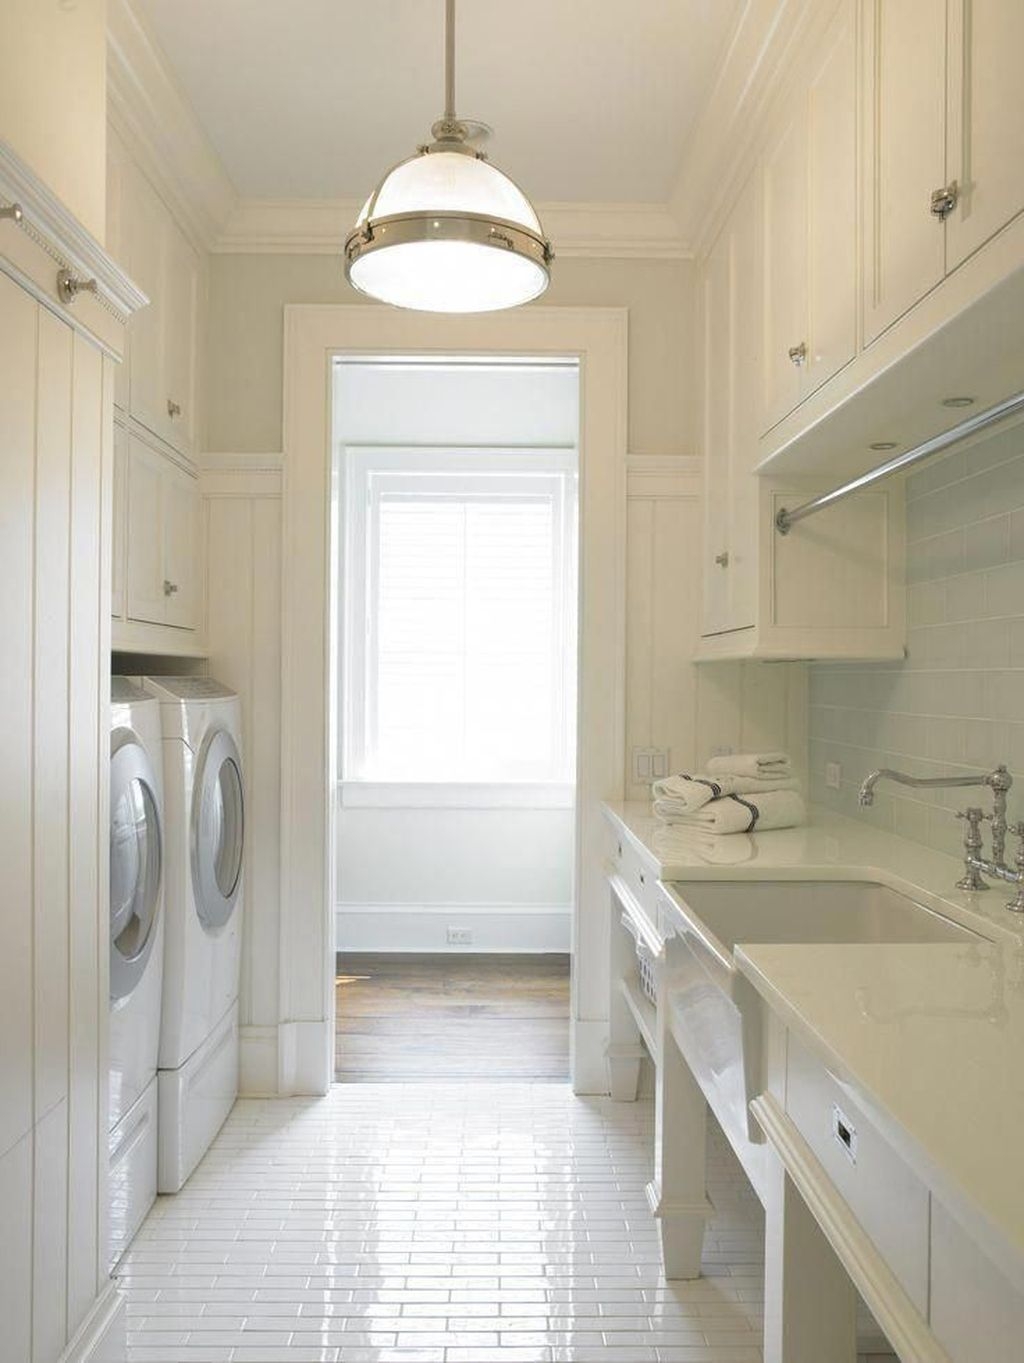 Inspiring Laundry Room Design With French Country Style 25